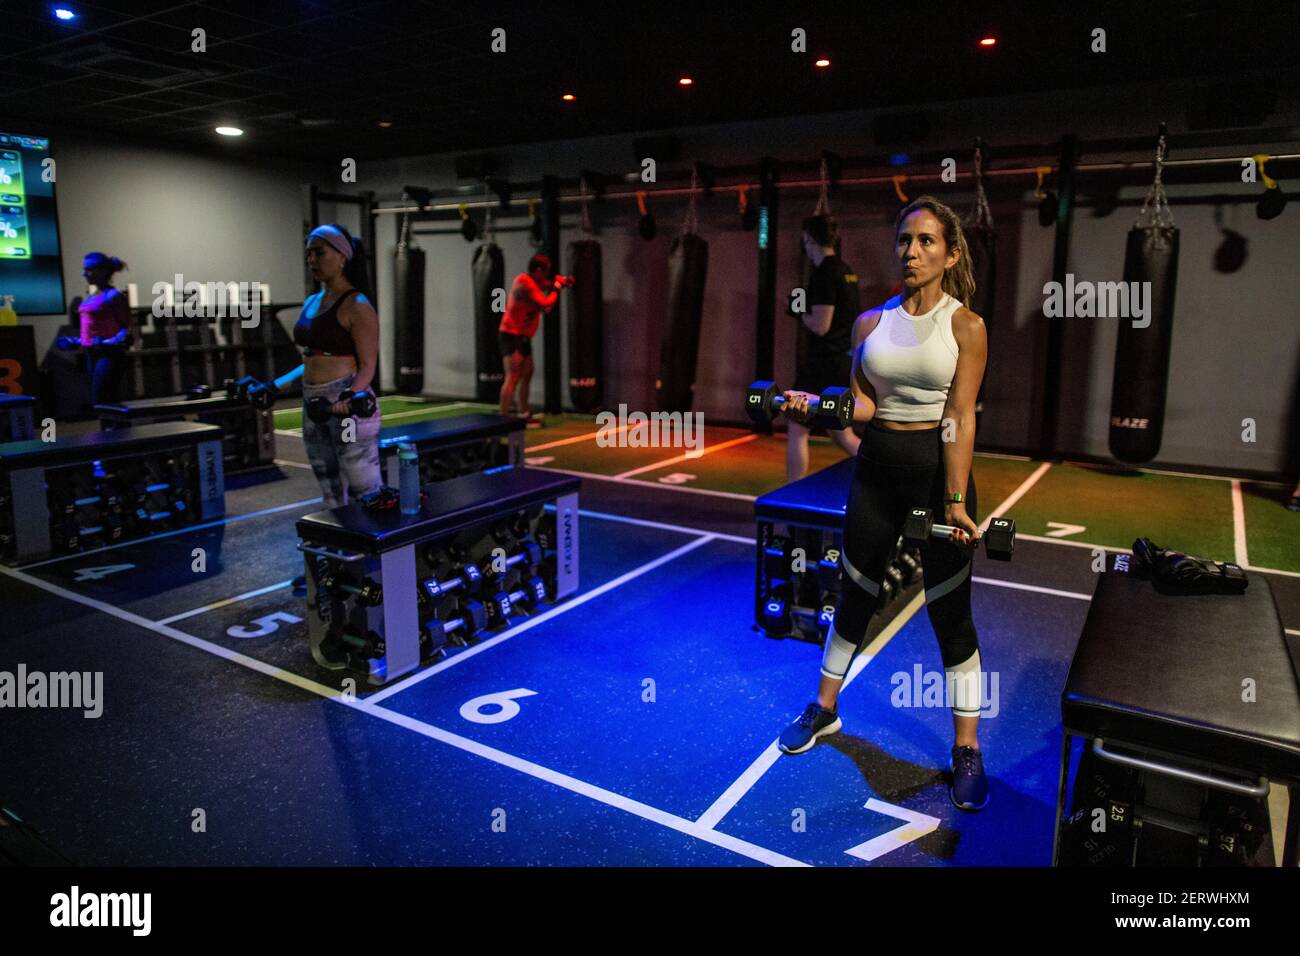 Members workout in one of the studio classes held at David Lloyd Hampton  club as it re-opens at midnight for the first time since lockdown#1 closure  Stock Photo - Alamy